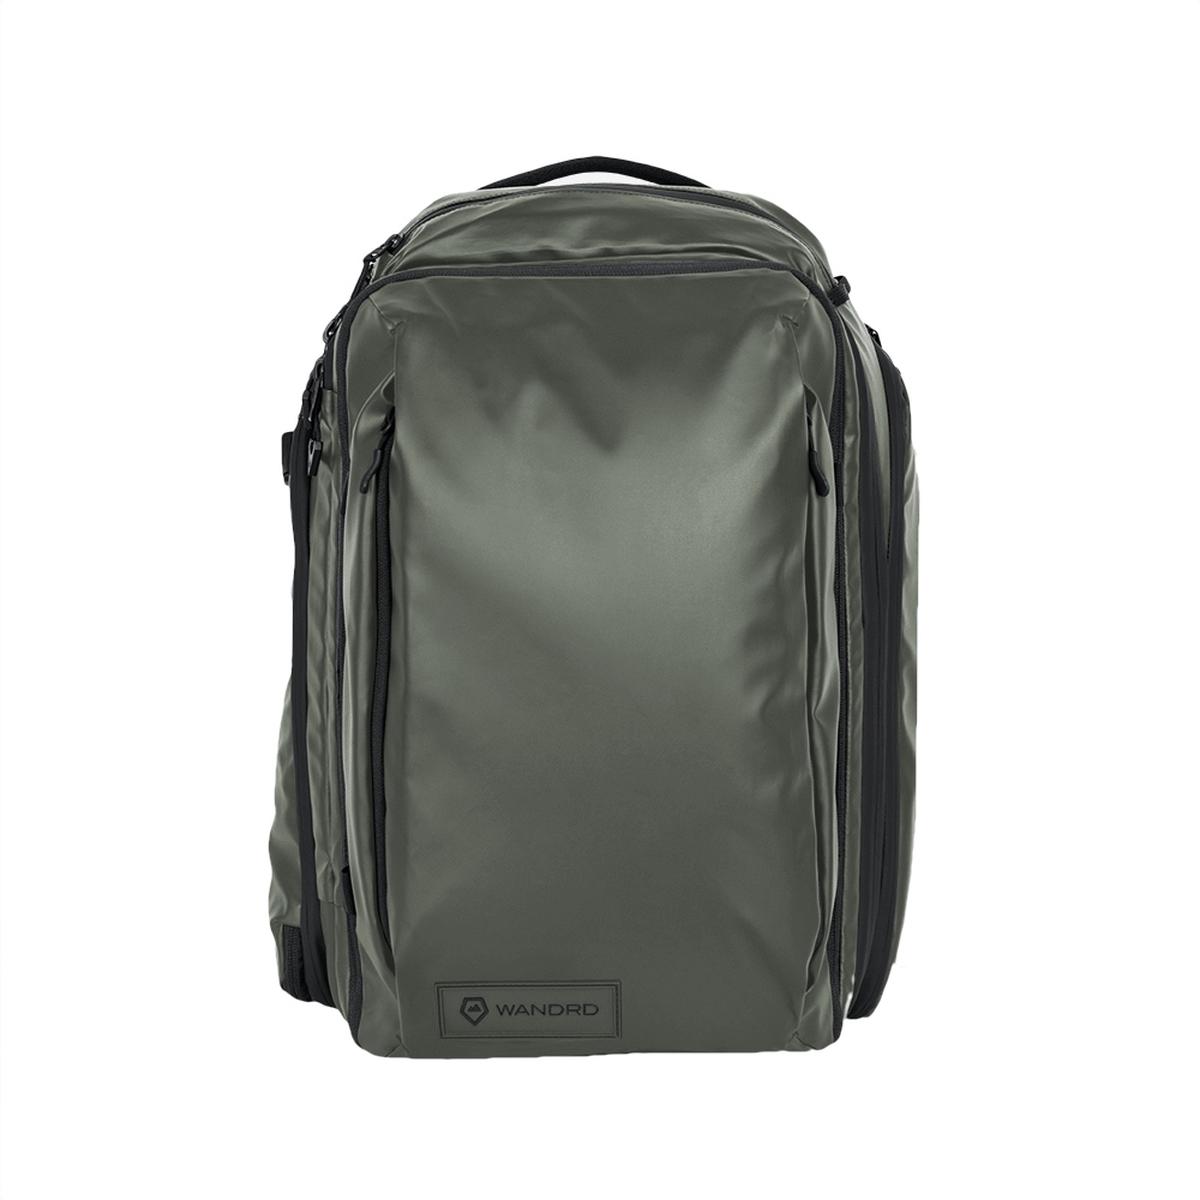 WANDRD Transit 35L Travel Backpack Wasatch Green Essential Bundle